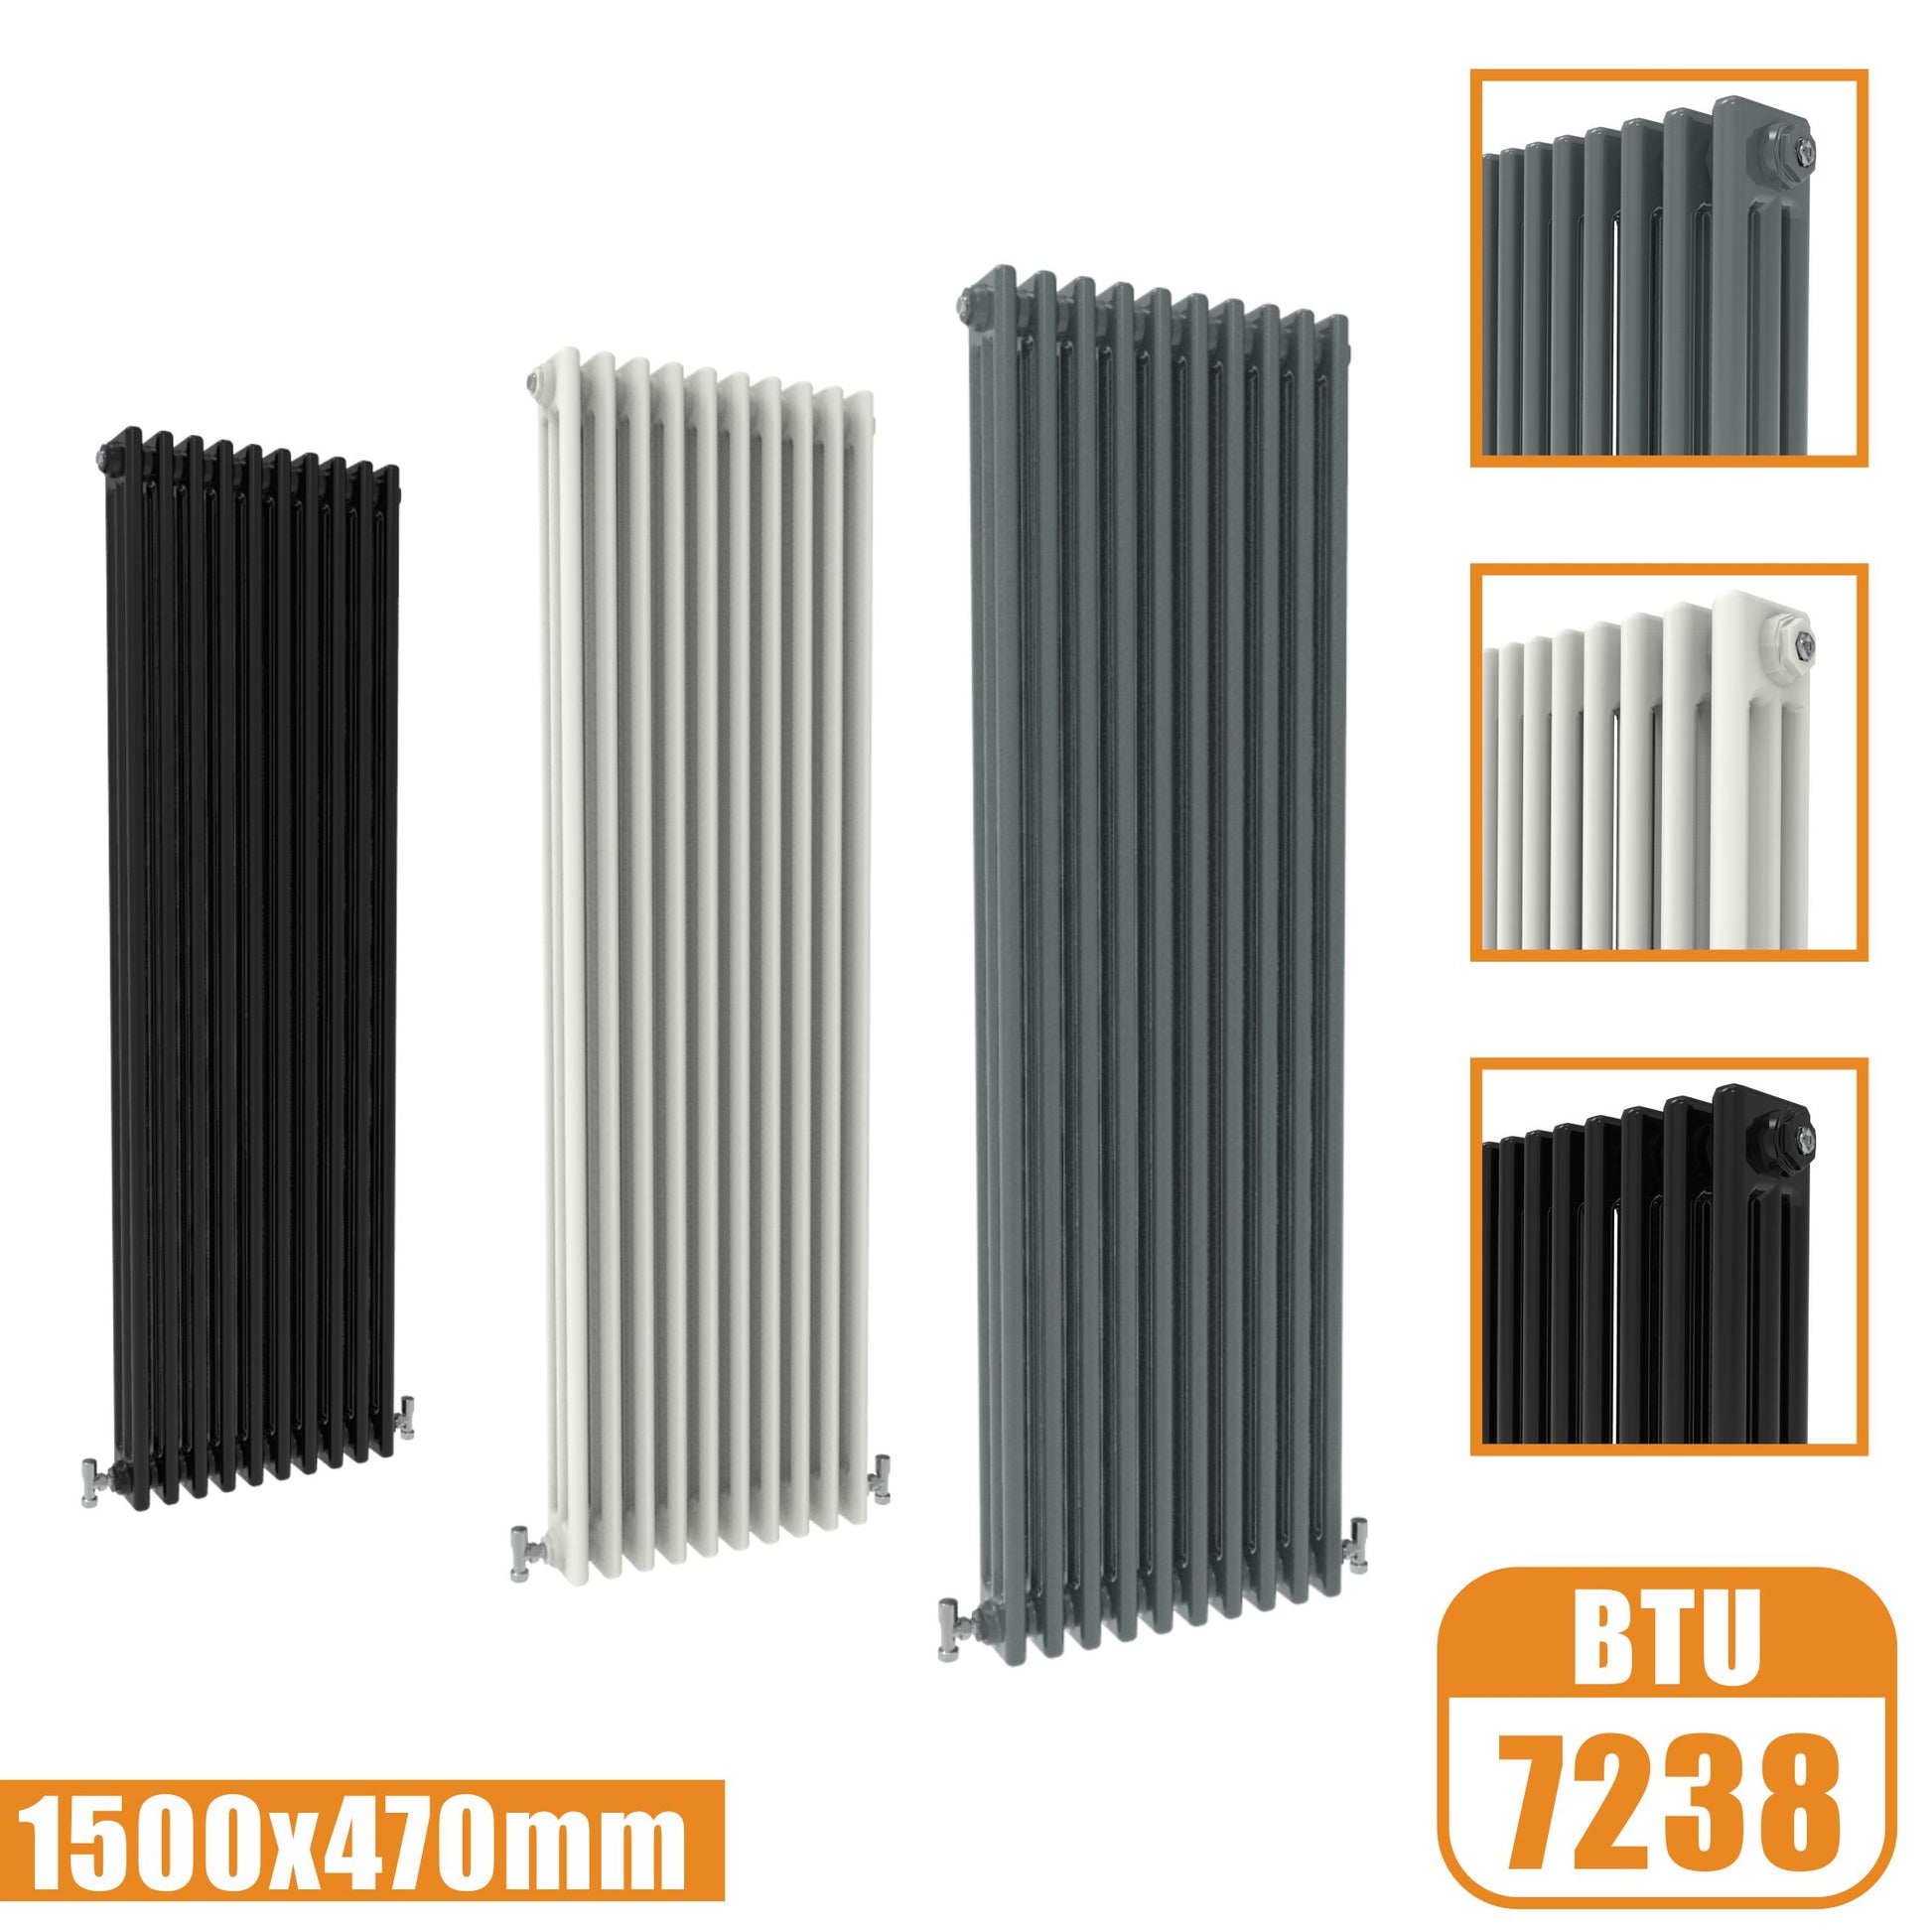 Cast Iron Style Vertical Tall Traditional 2&3 Column Central Heating R